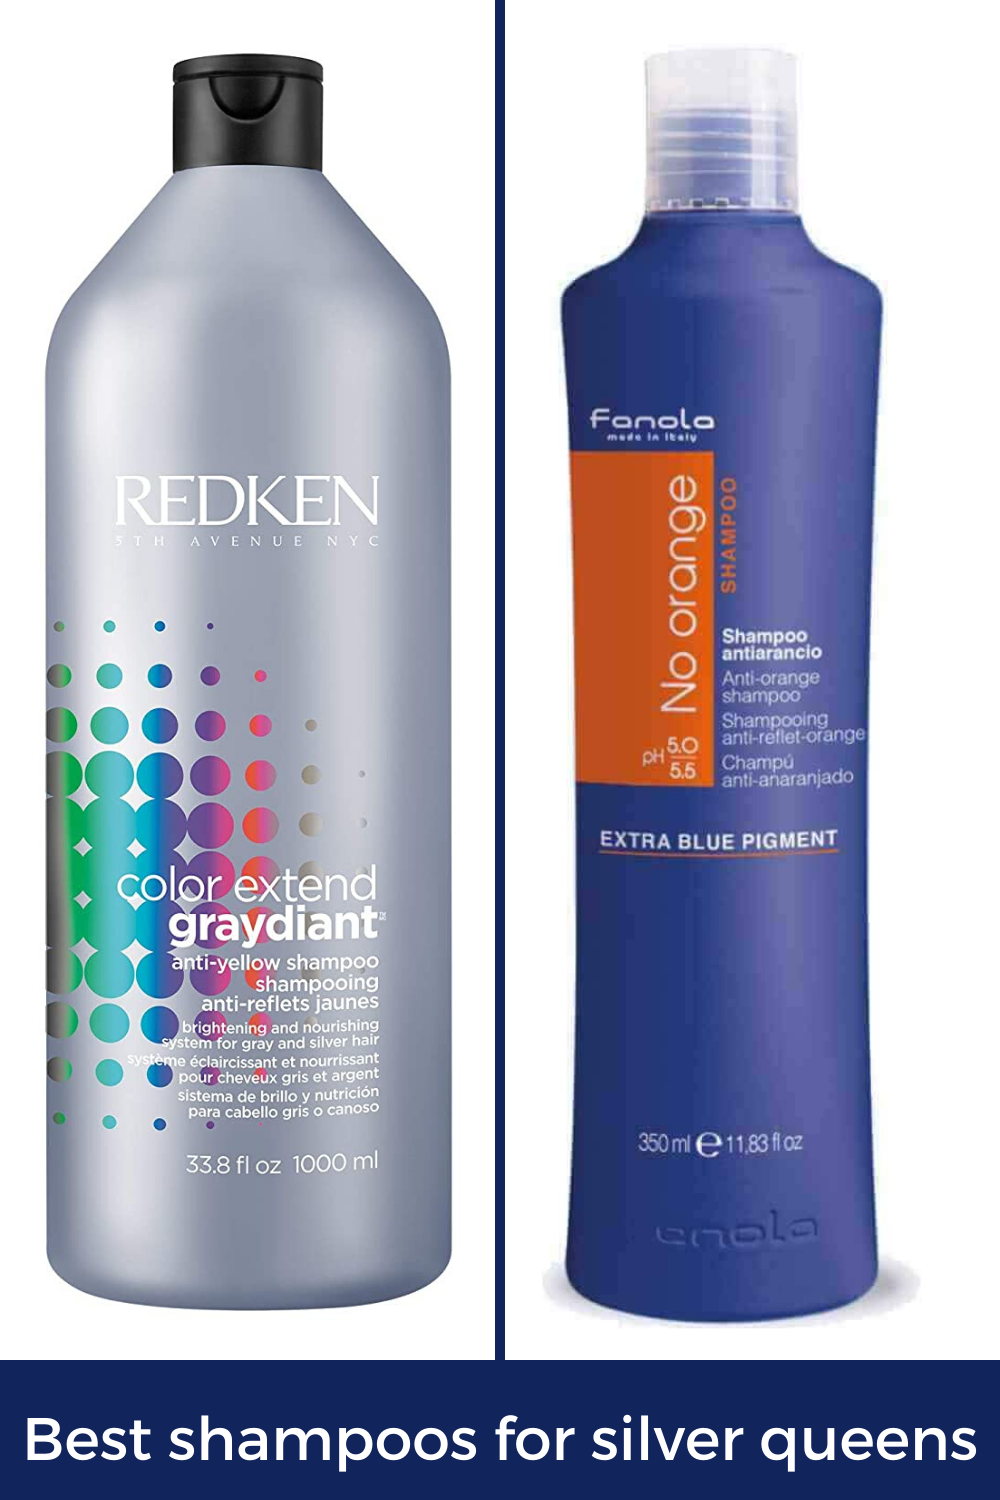 Best shampoos for silver queens